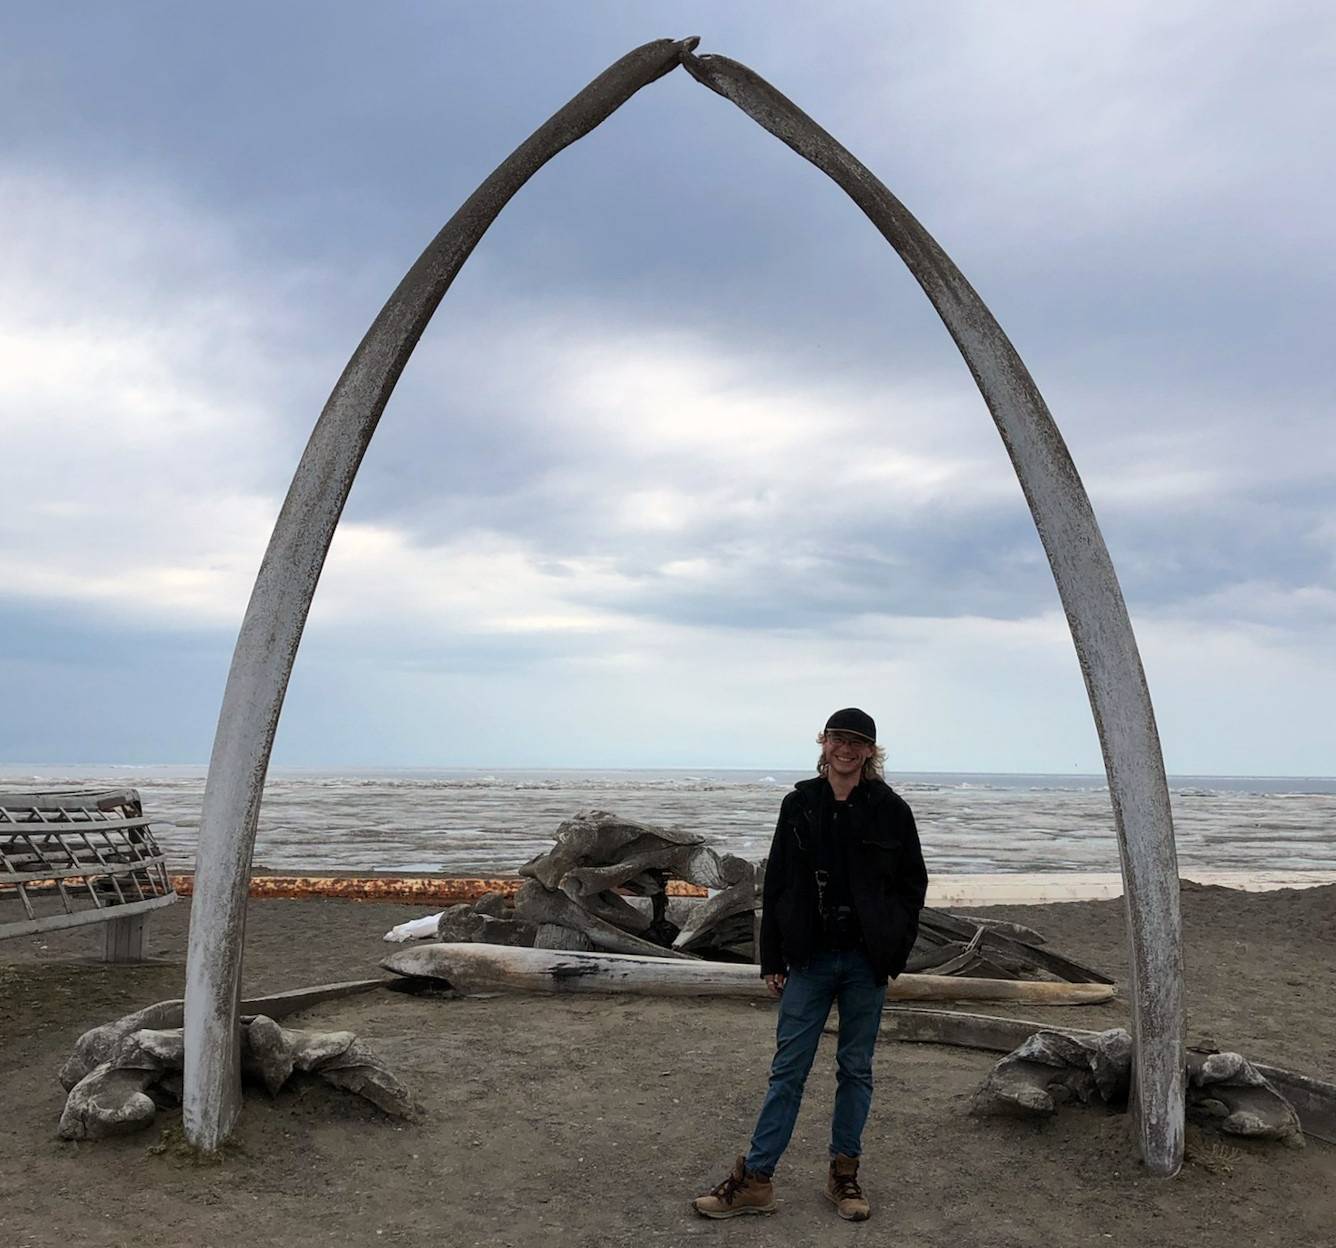 Justin under the whale arch